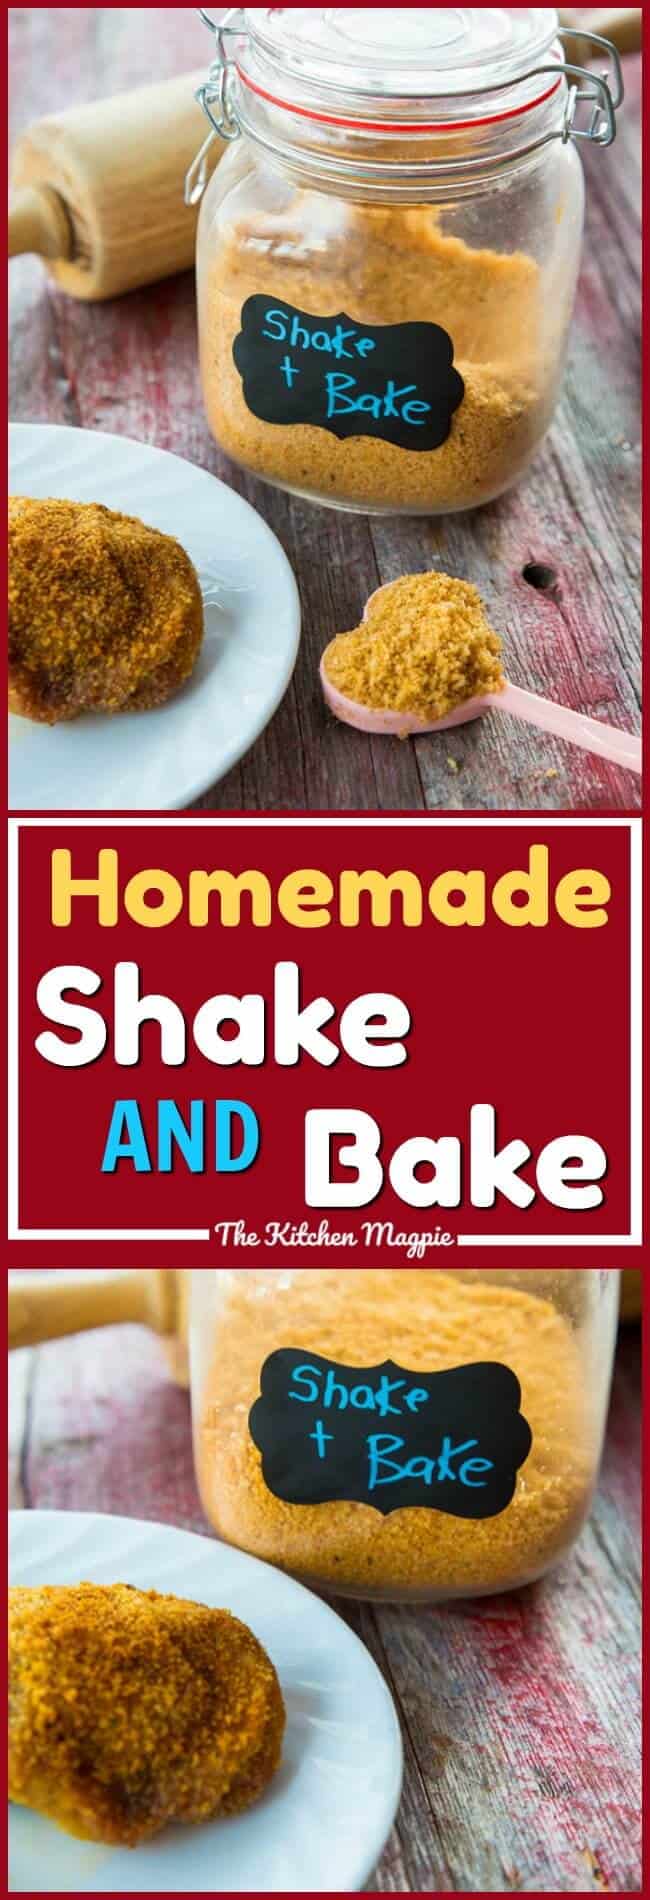  How to Make the best Homemade Shake and Bake! No need to buy it from the store any longer -this is cheaper and there's no trans fats or hydrogenated oils in this recipe! #homemade #chicken #shakeandbake 